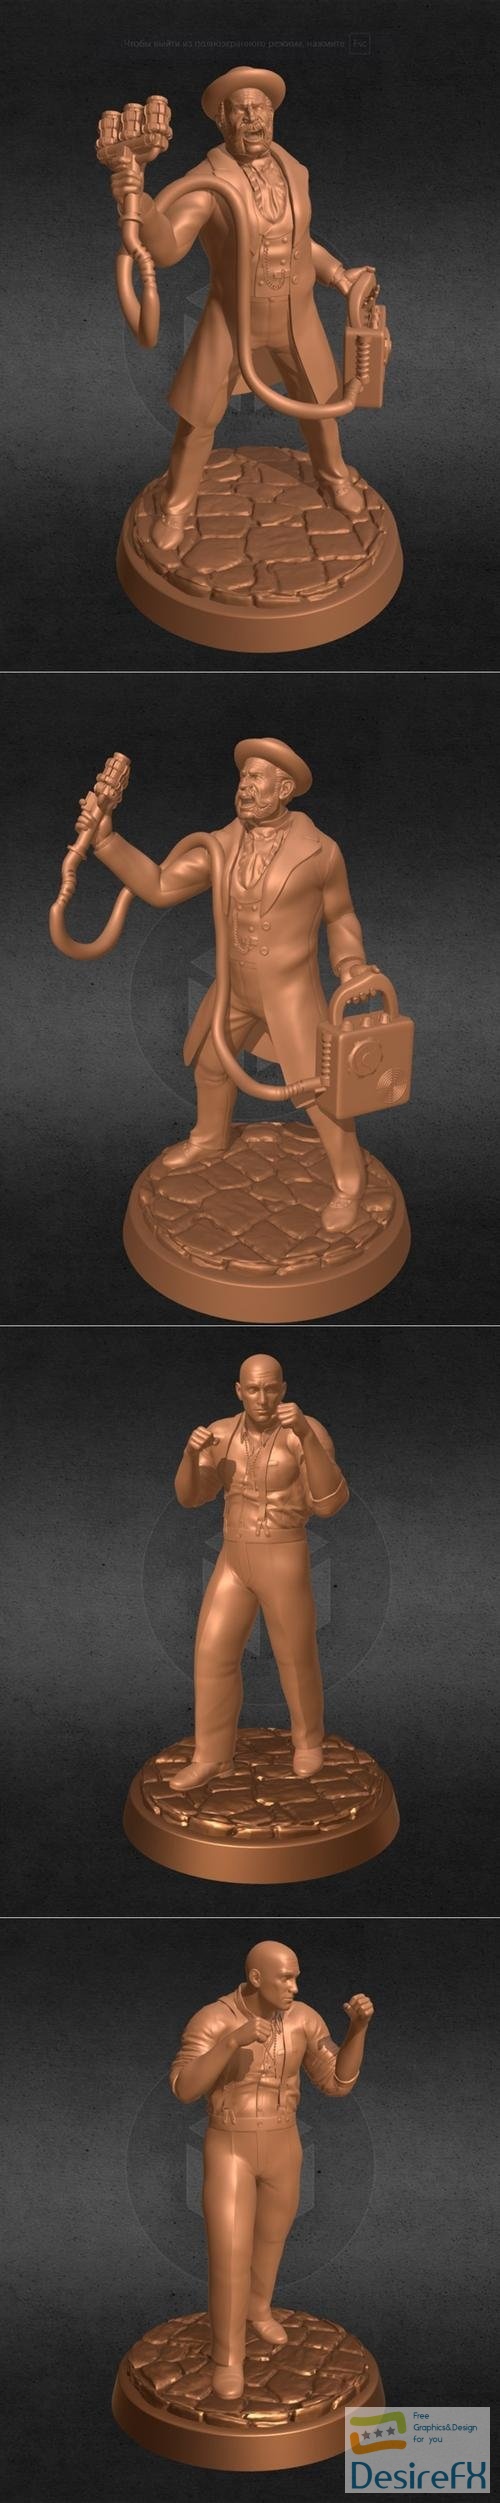 Cientist Call Of Cthulhu and Fighter Call Of Cthulhu – 3D Print